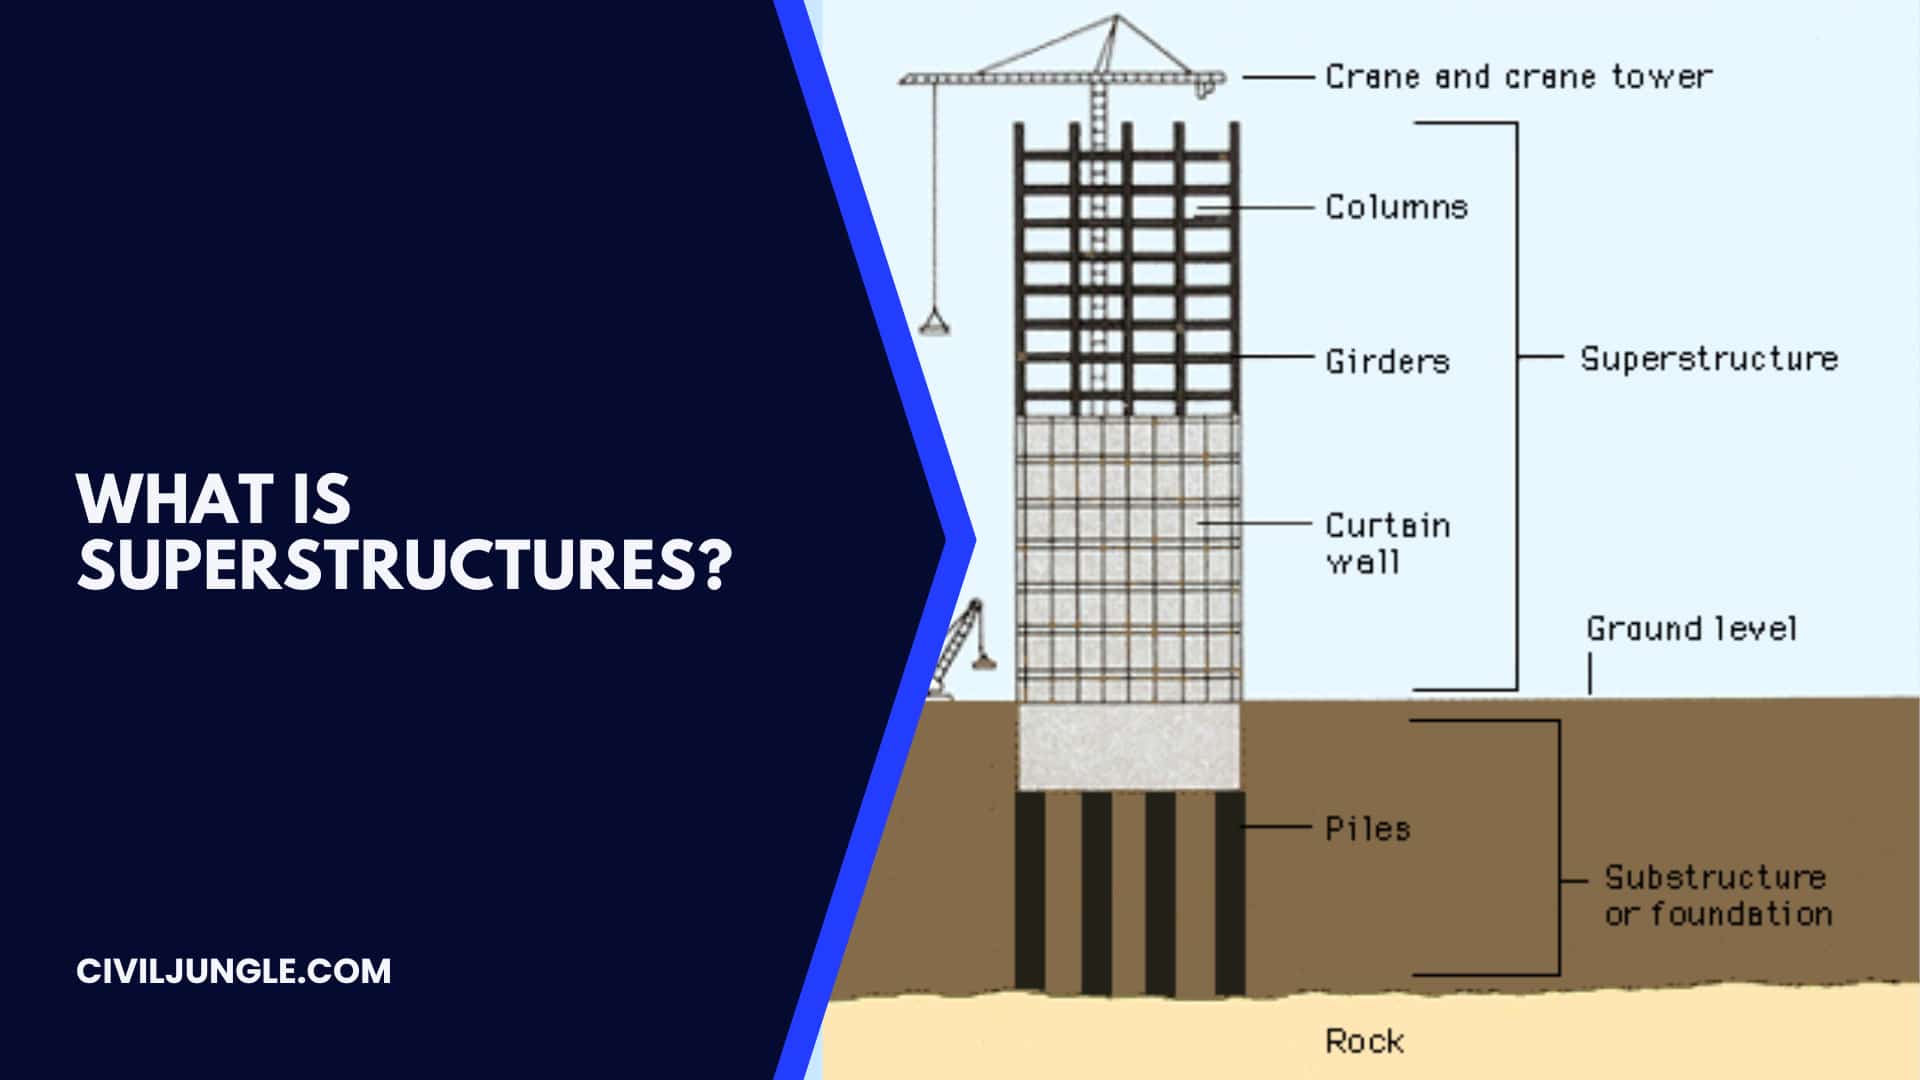 What Is Superstructures?